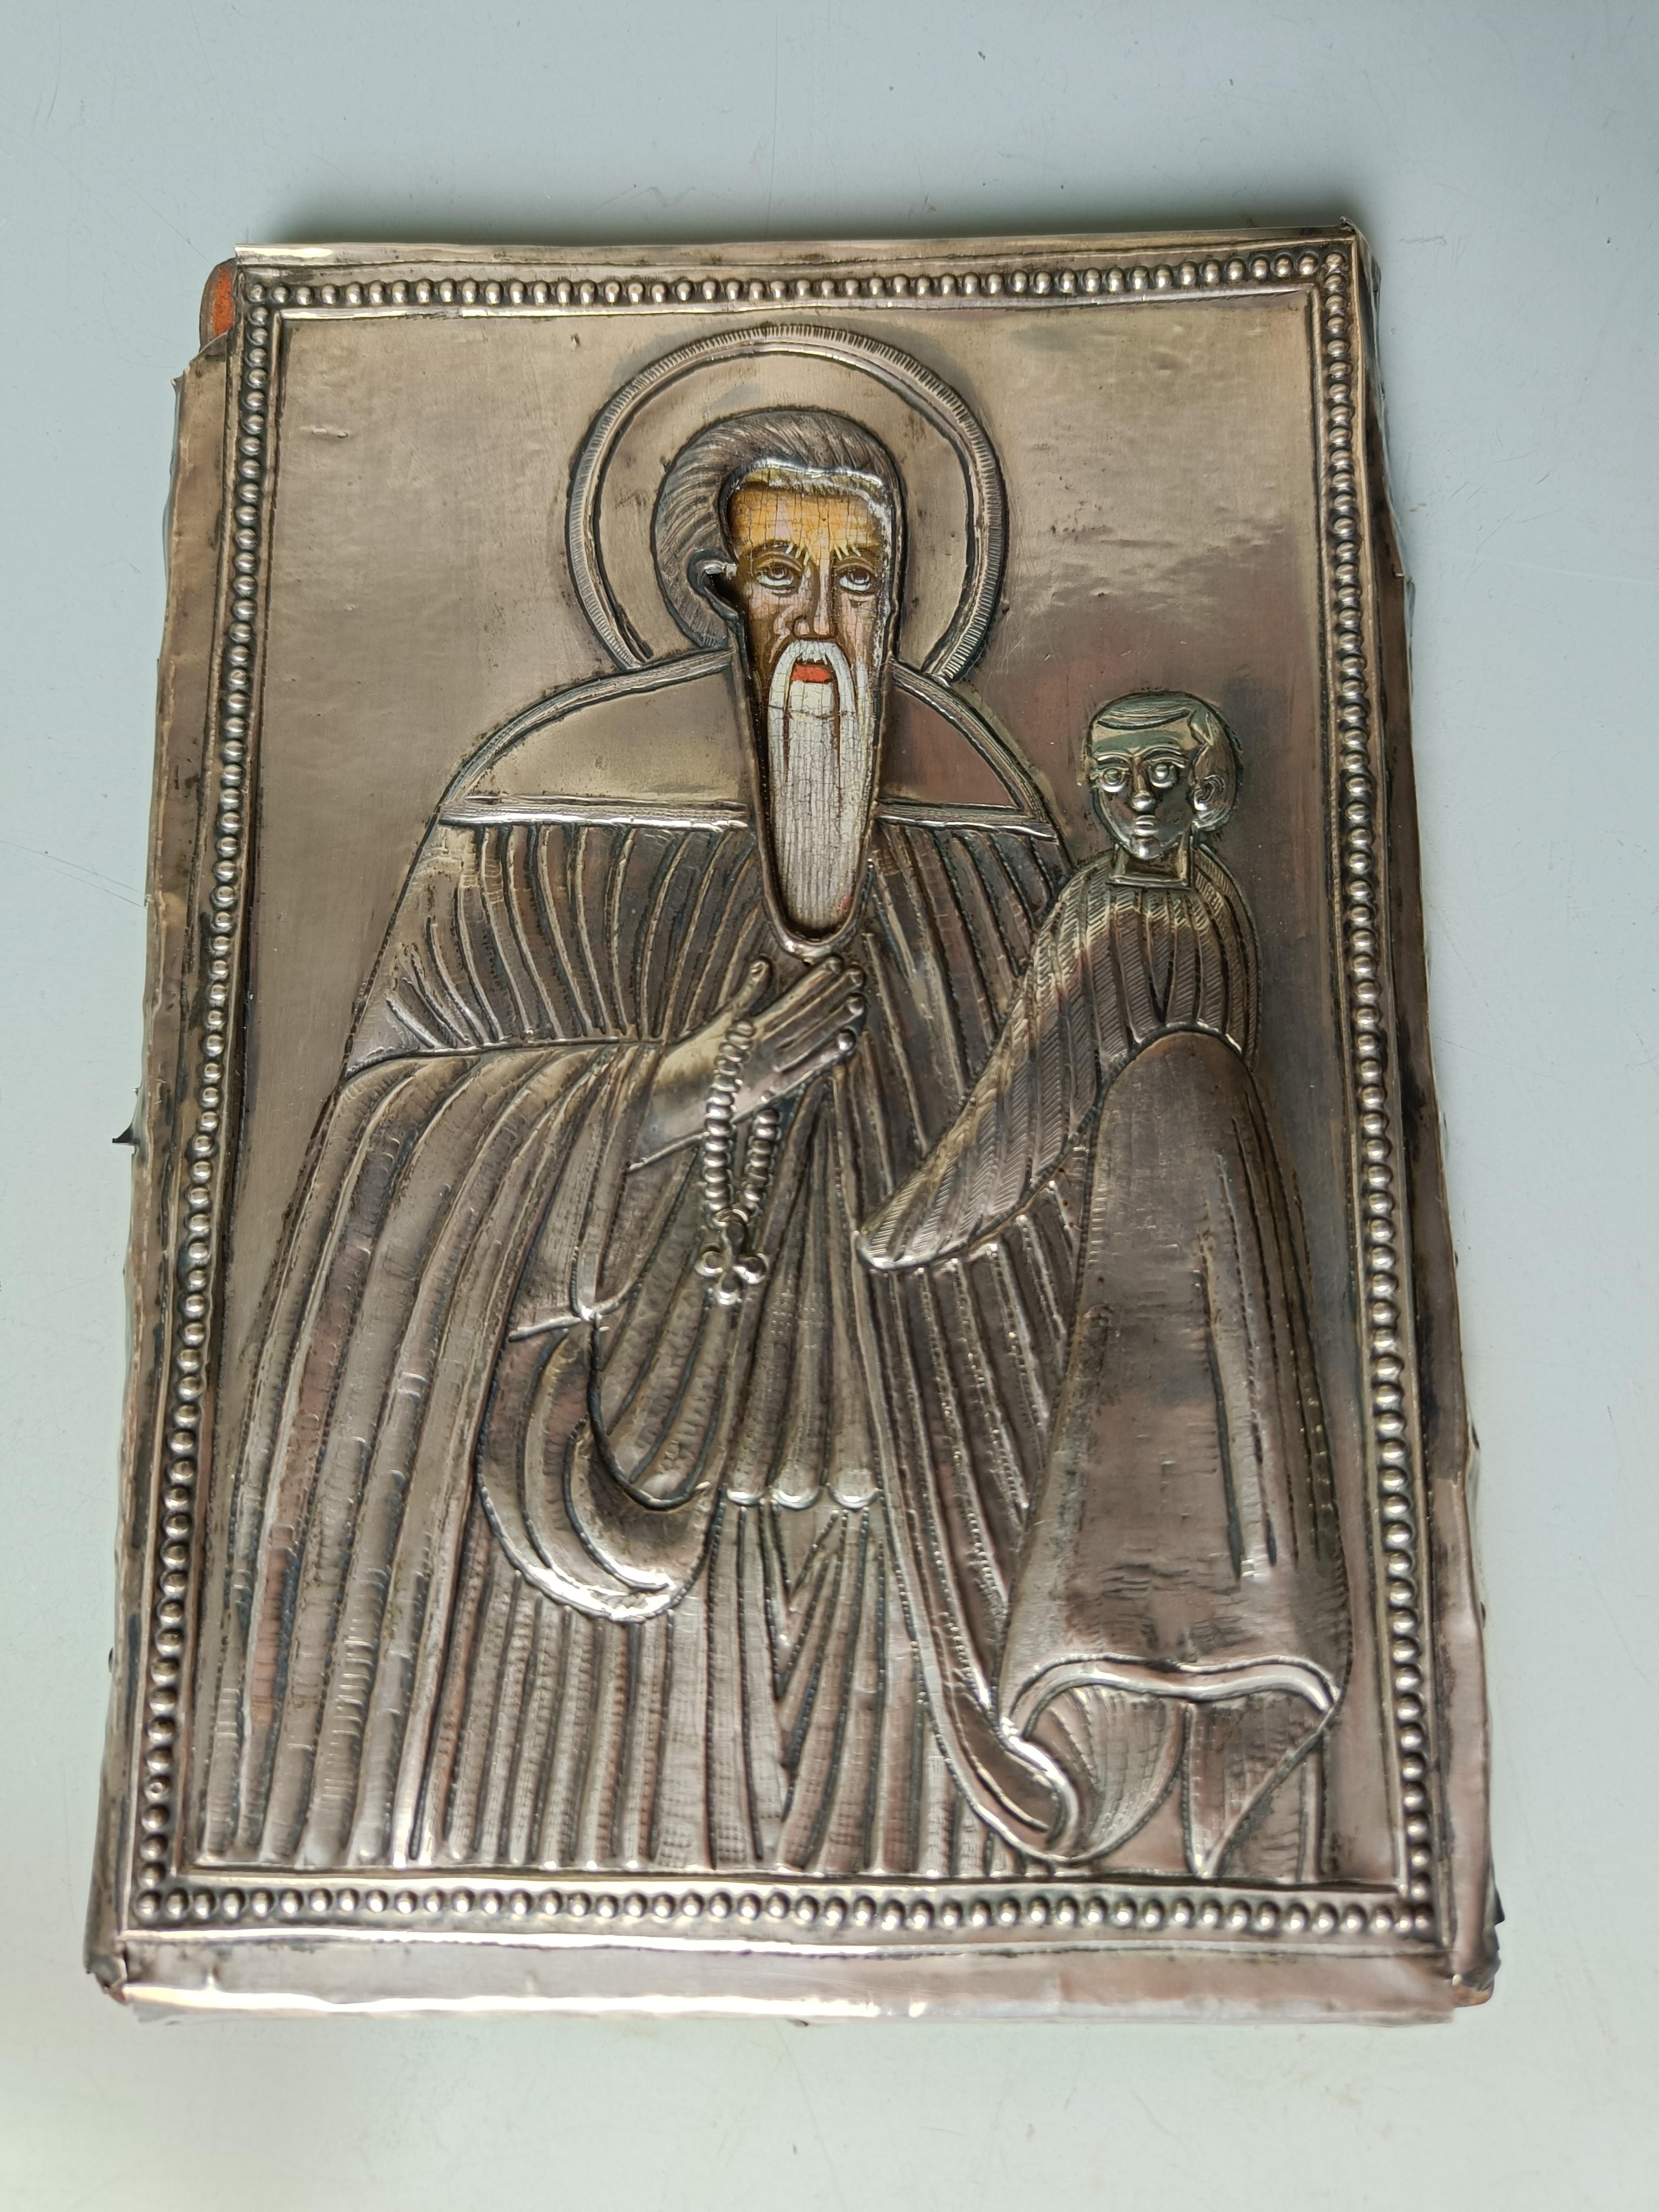 Antique Greek  Icon 
Saint Stylionos Protector of Children Religious Orthodox Byzantine style con Sterling Silver  
Painted on Wood with with sterling silver top, old writing on back
Circa late 19th Century.   size 19 x 13 cm
Provenance Jean Davenne